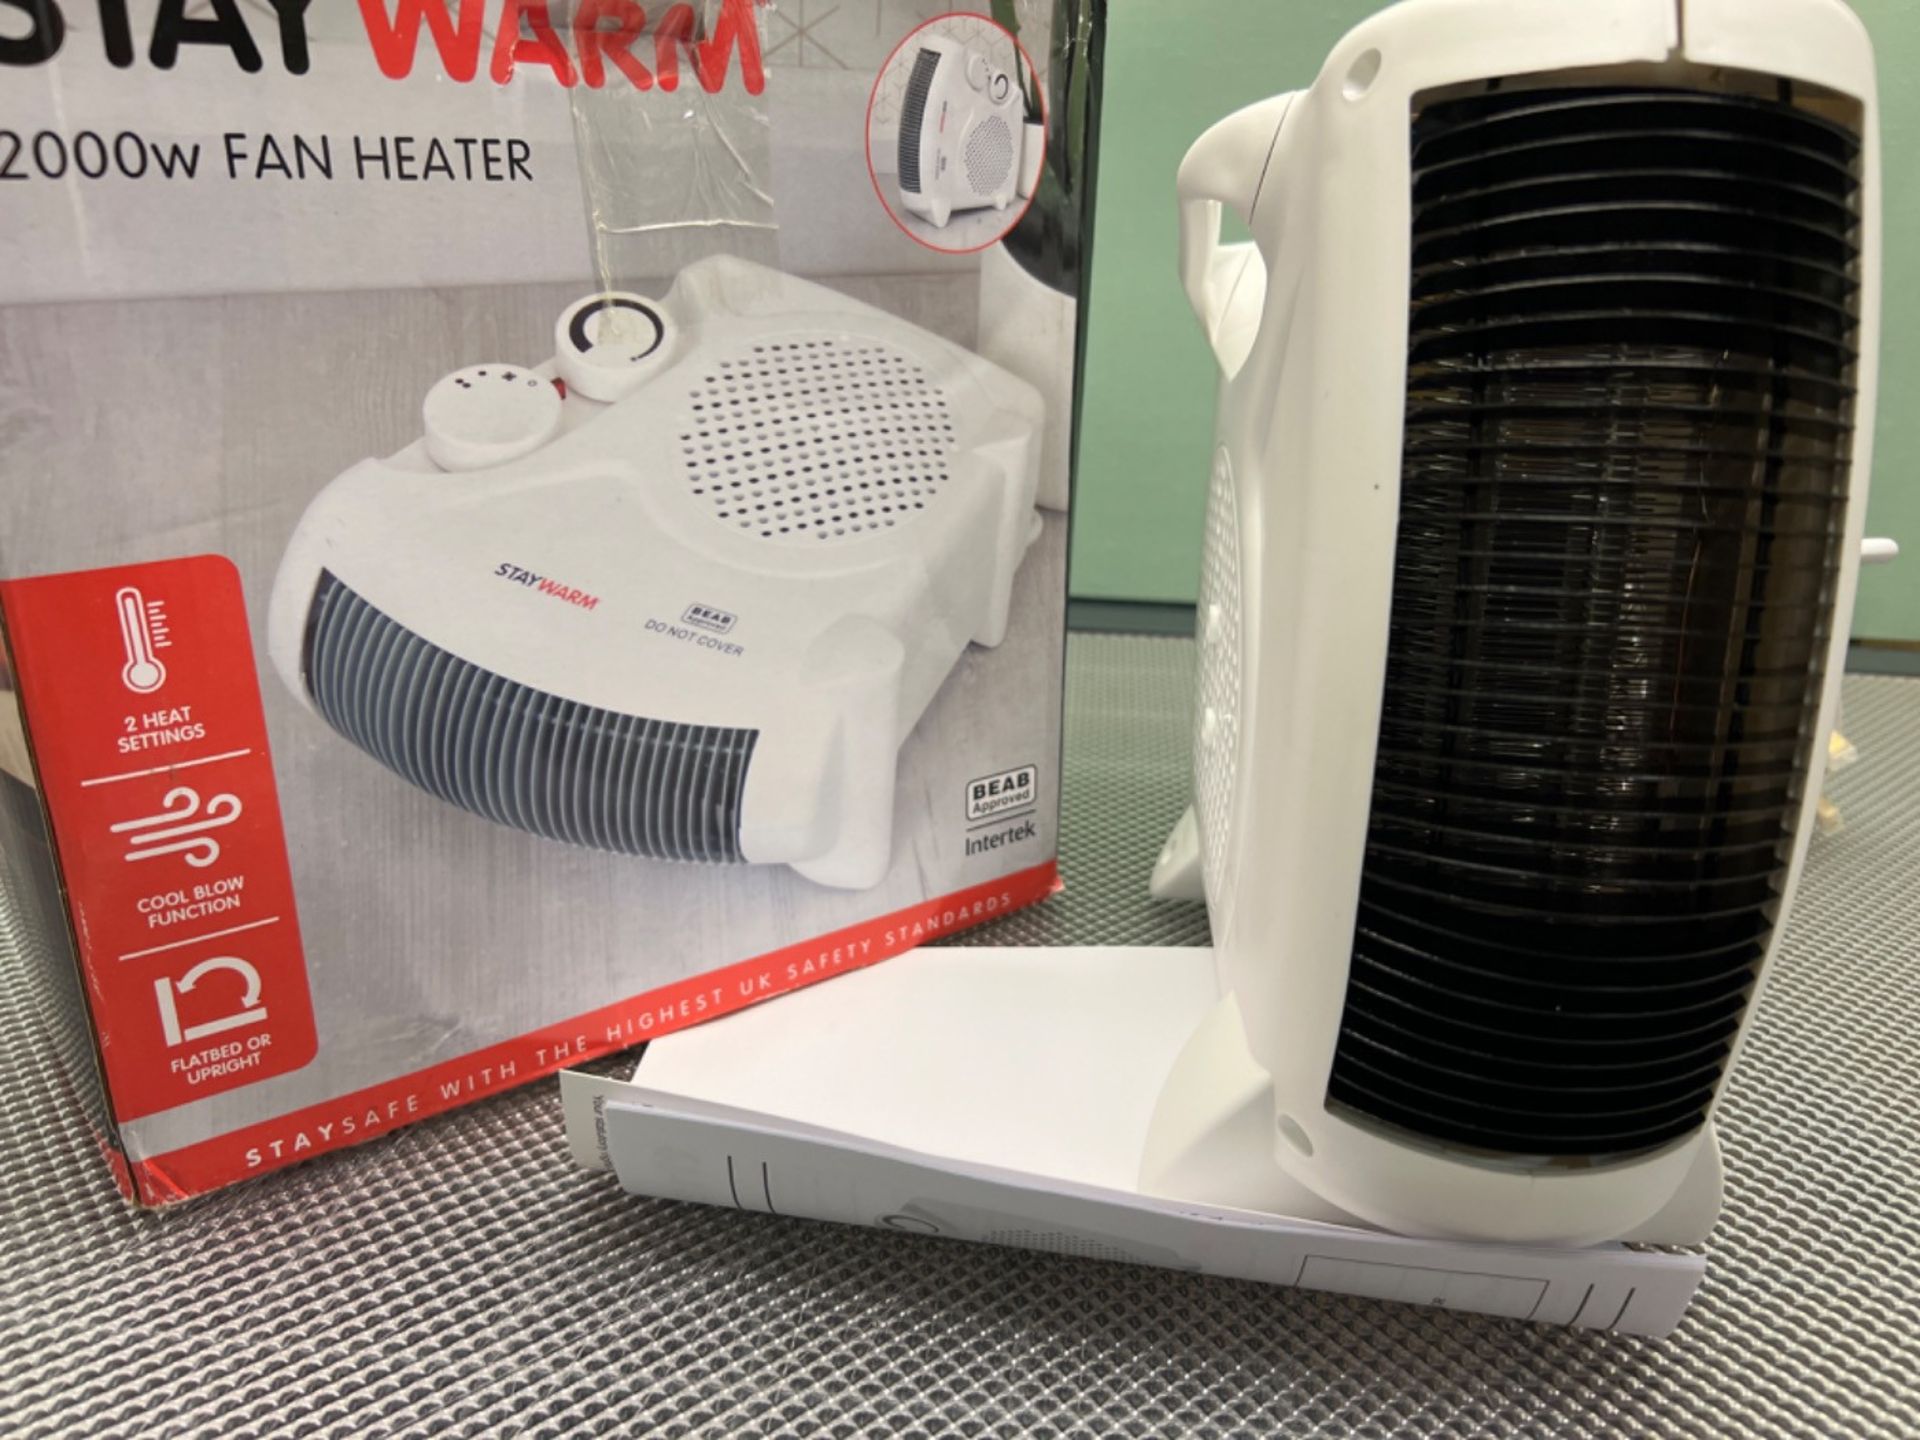 STAYWARM® 2000w Upright and Flatbed Fan Heater with 2 Heat Settings / Cool Blow Fan / Variable The - Image 2 of 3